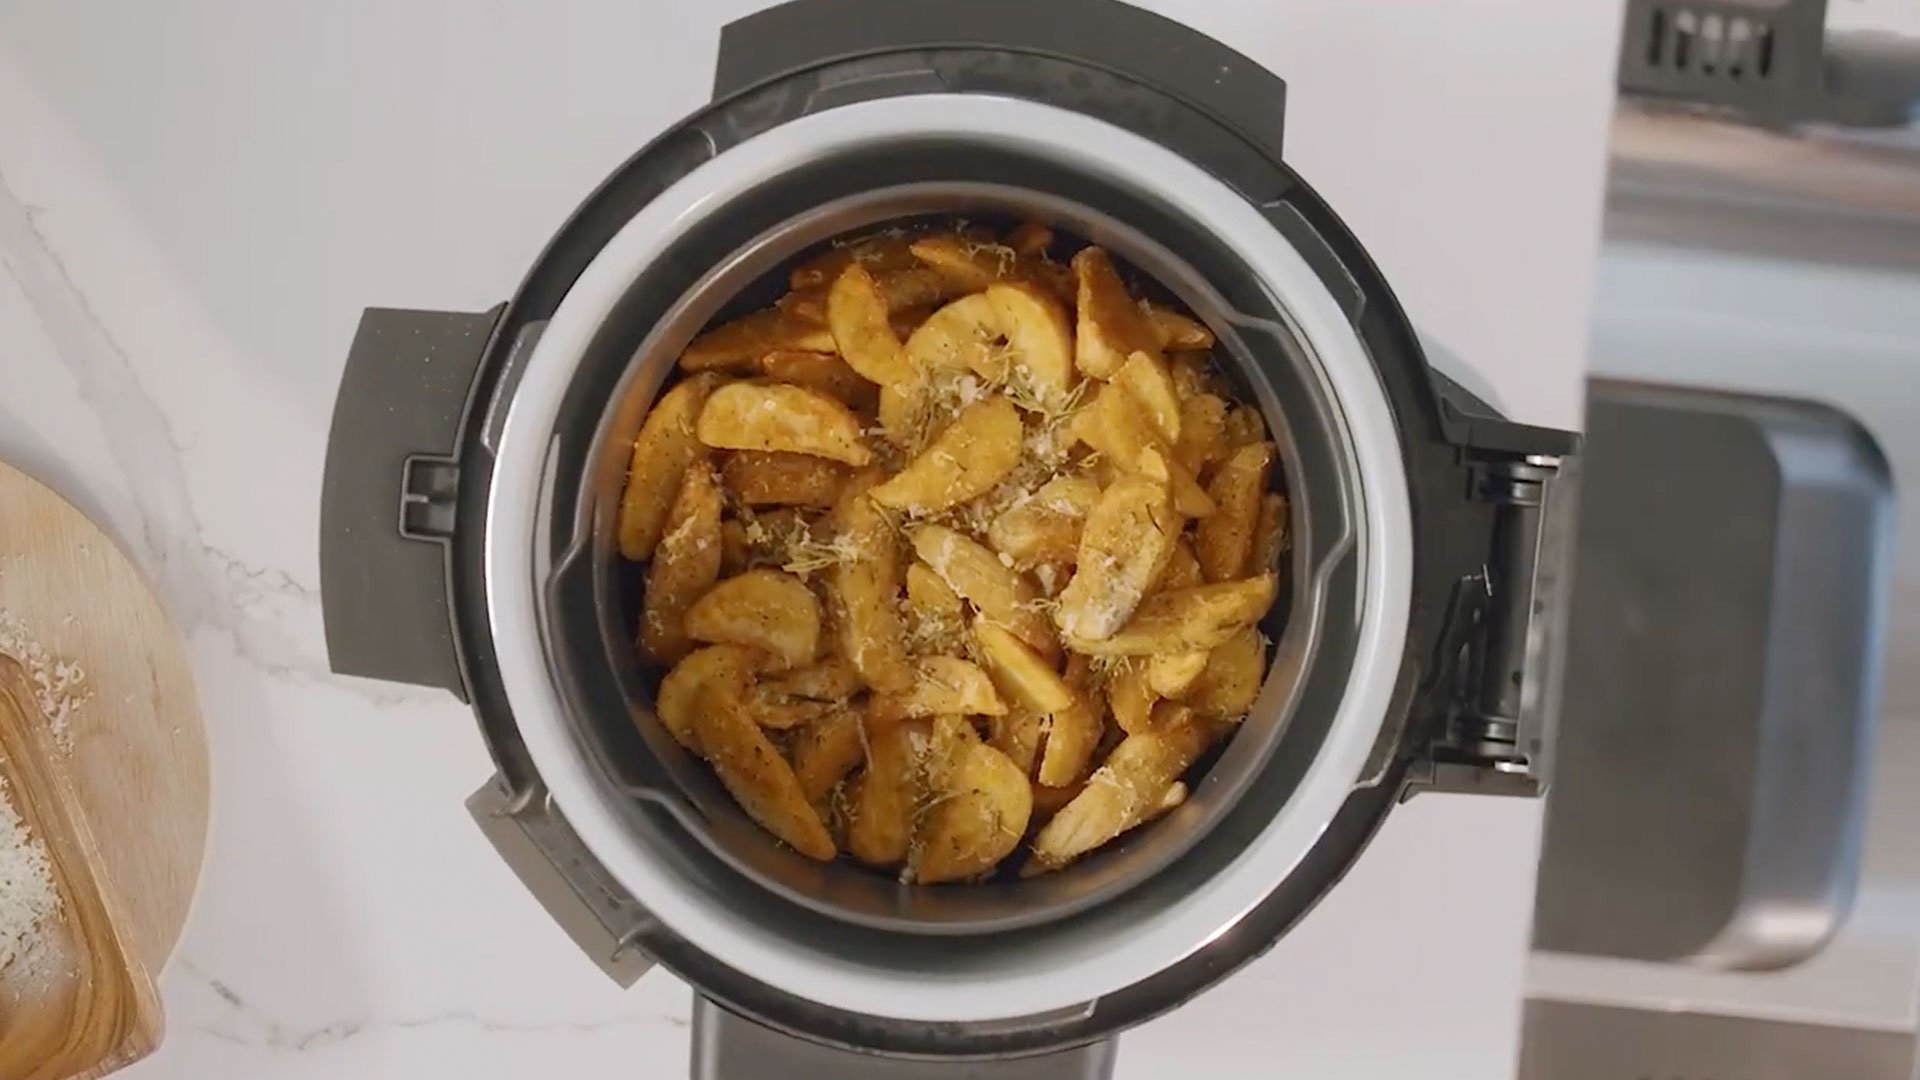 This Multifunctional Kitchen Appliance Makes One-Pot Meals in 15